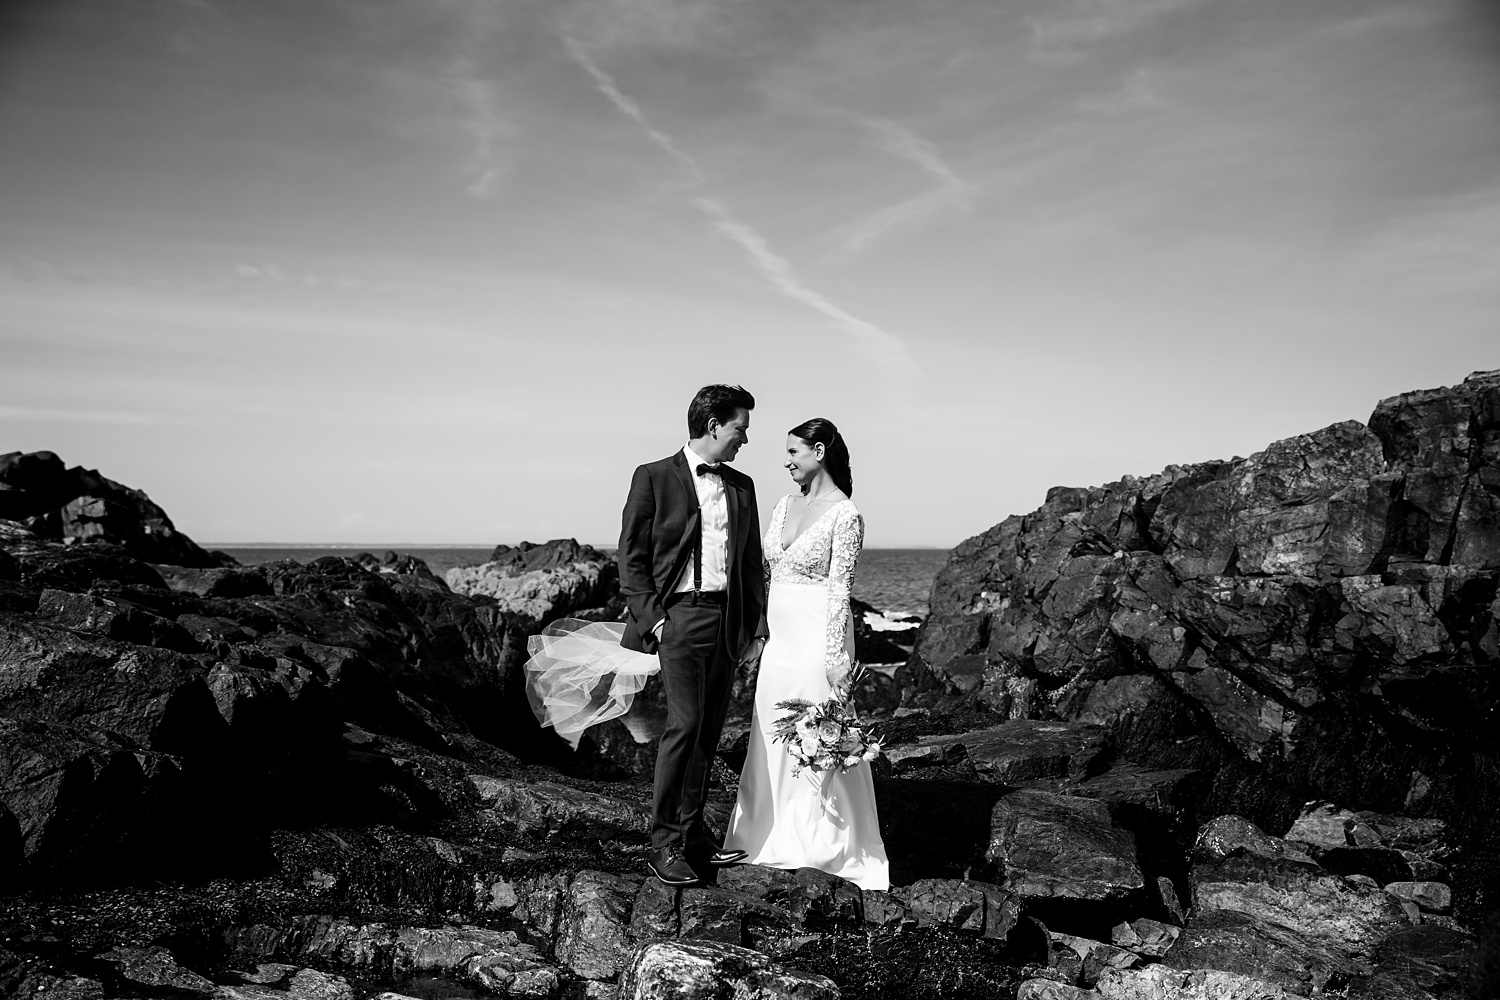 Marginal Way in Ogunquit and the elopement couple on a sunny day